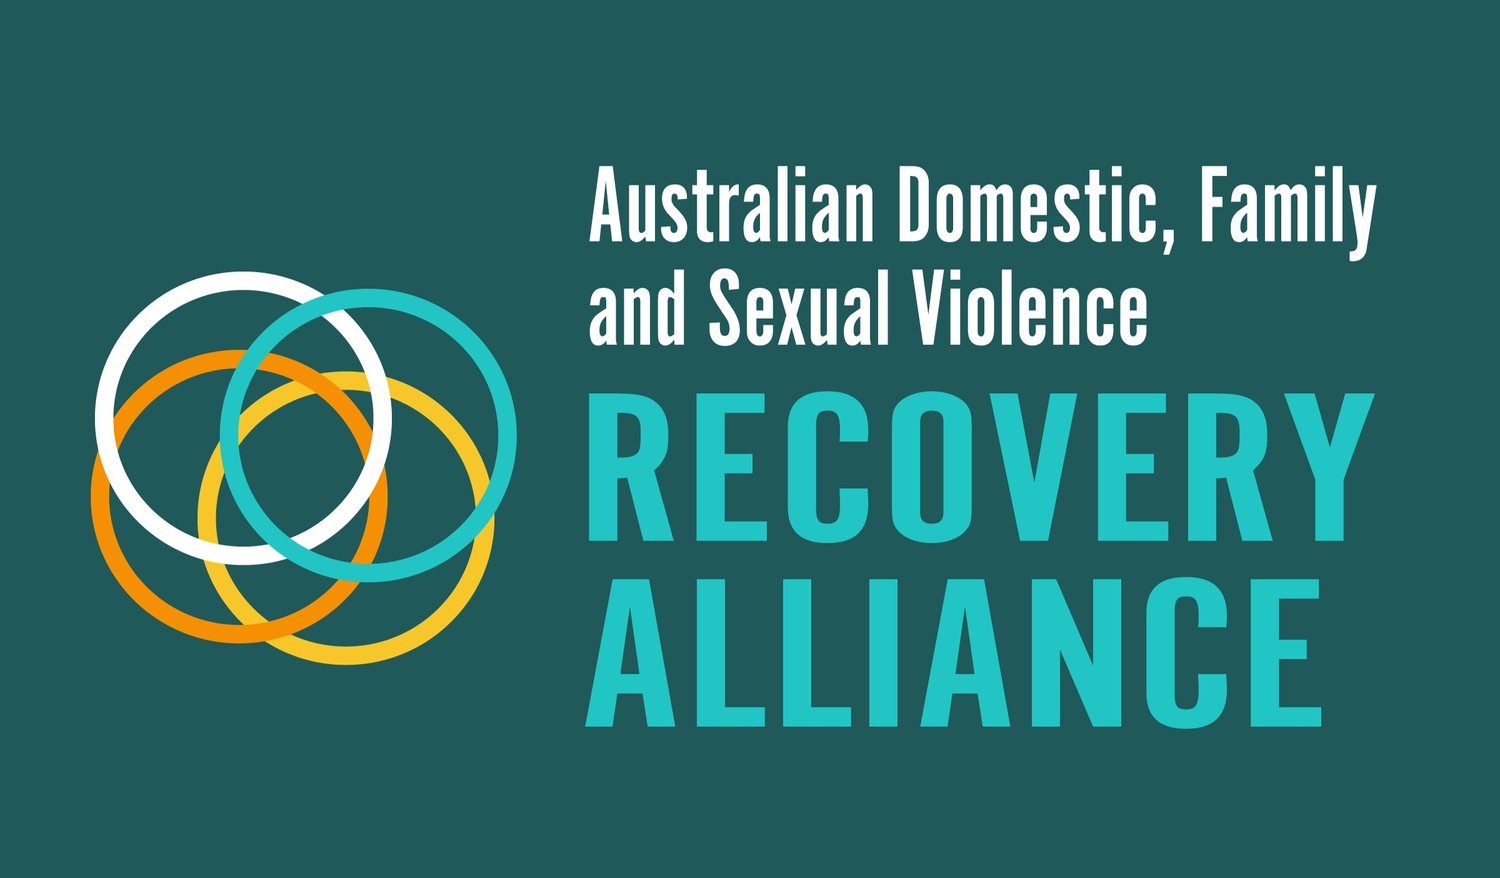 Australian Domestic, Family and Sexual Violence Recovery Alliance